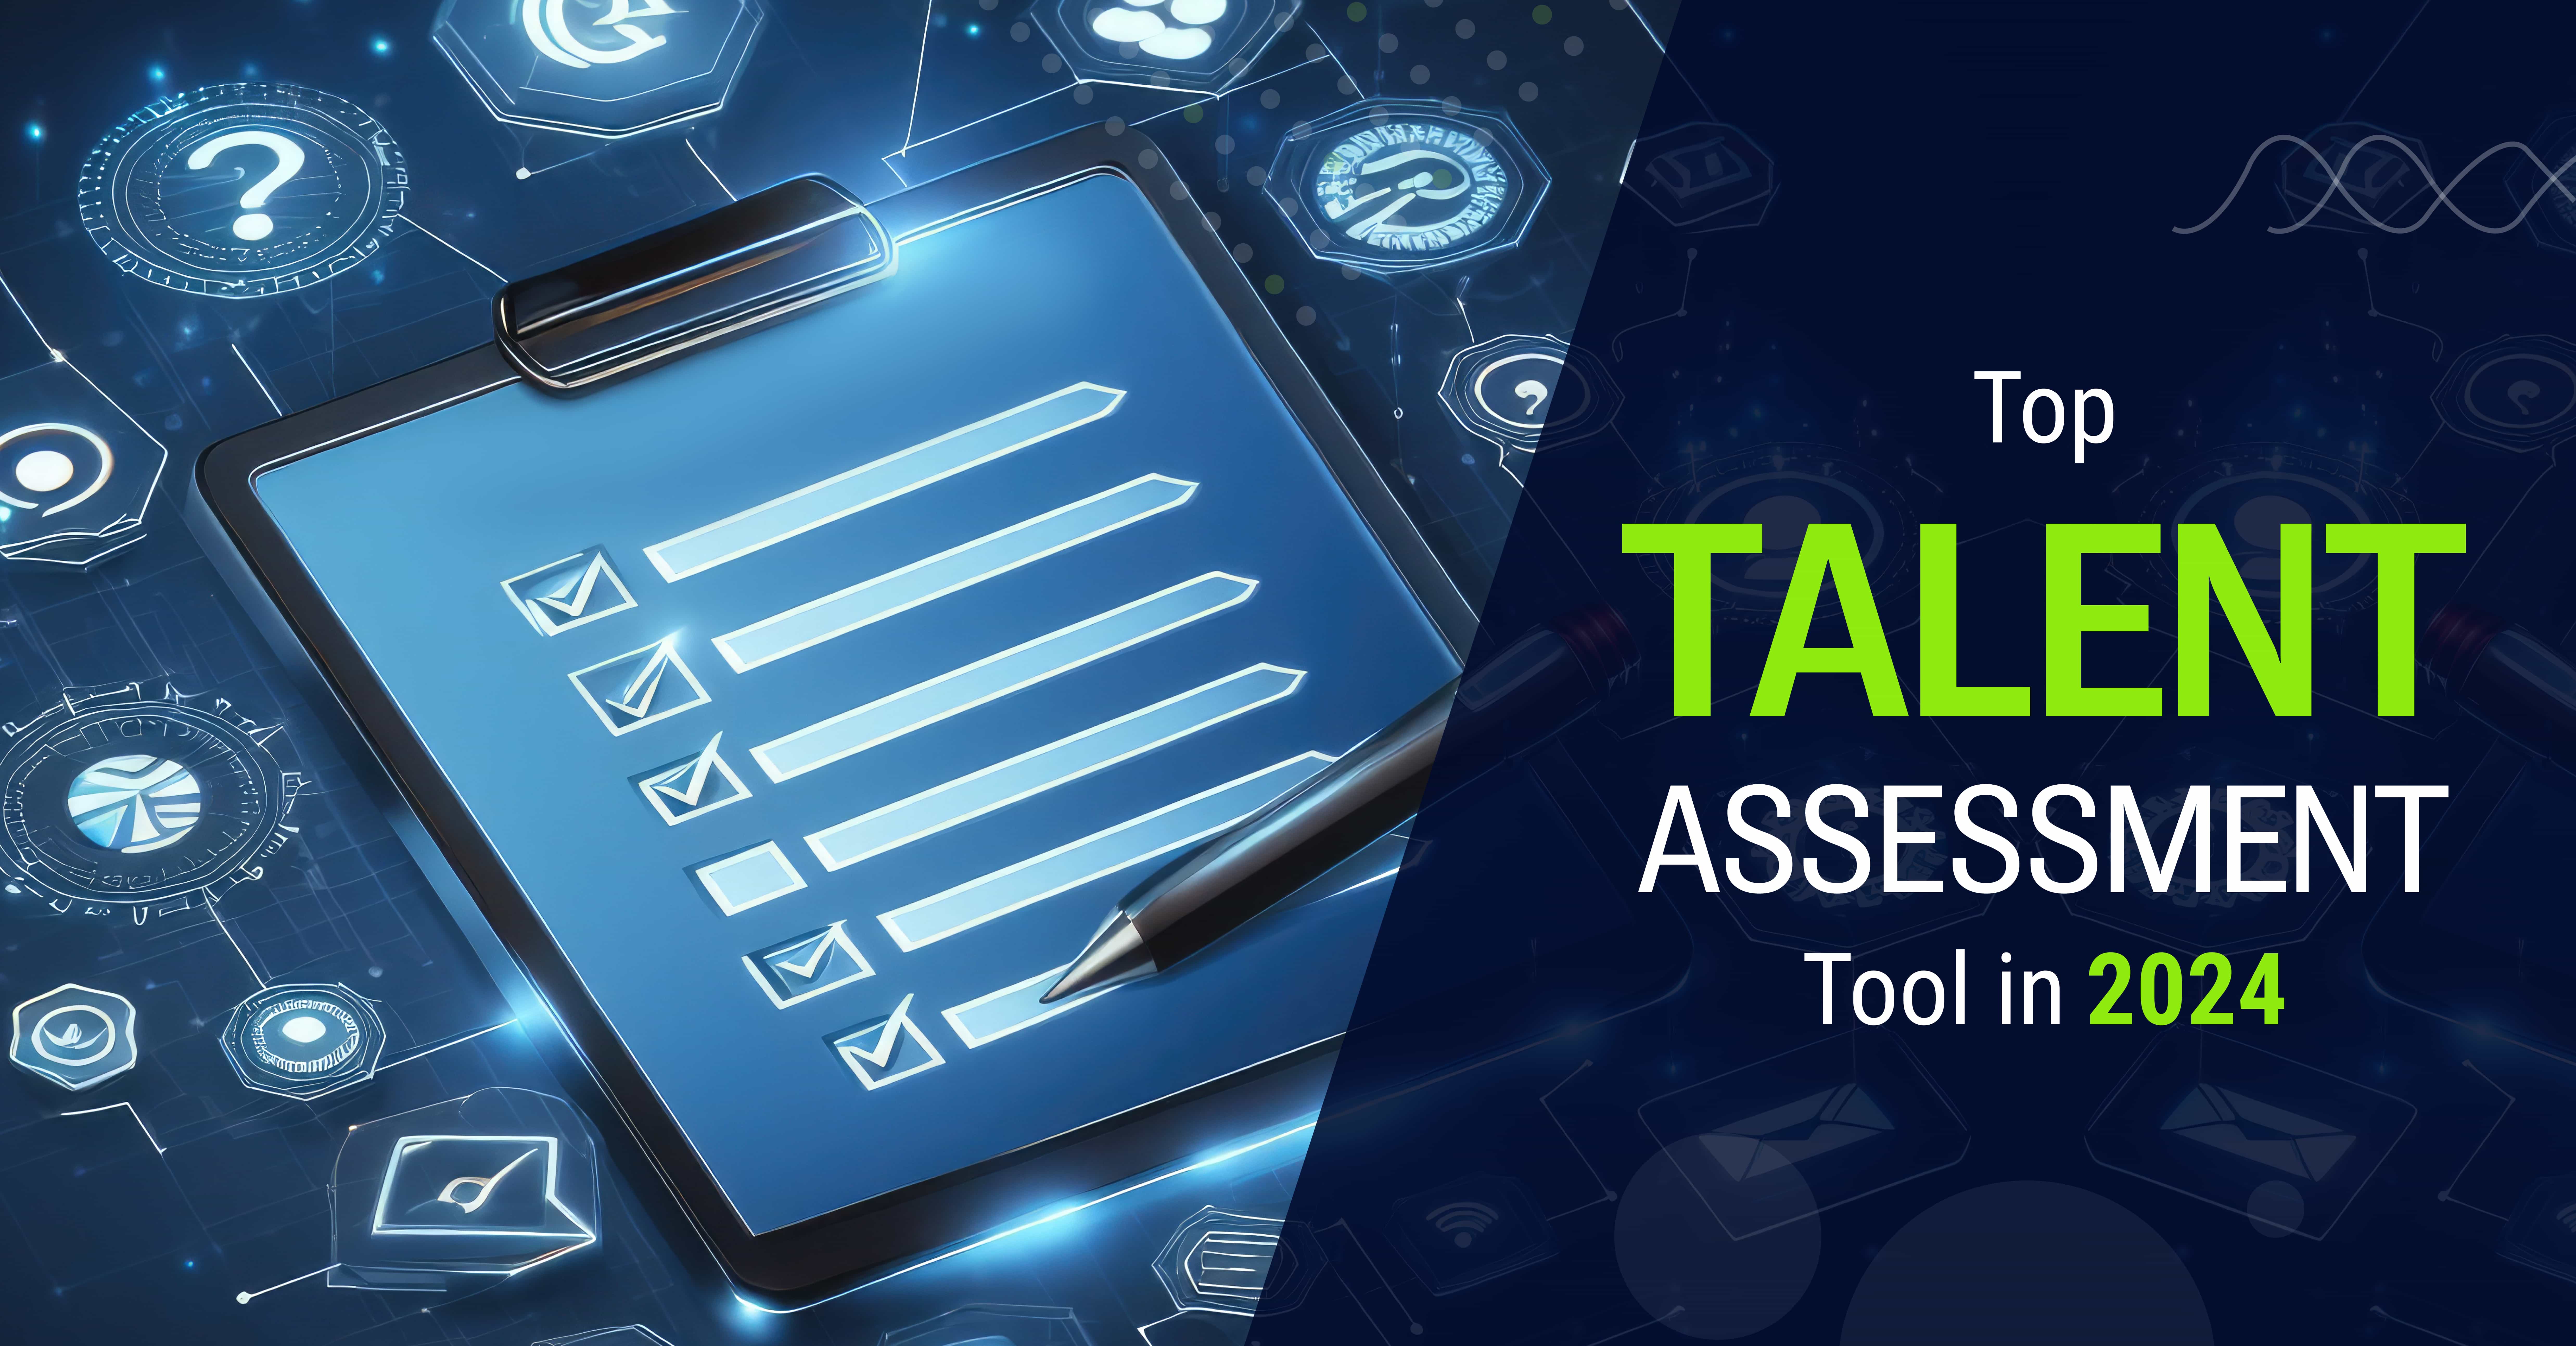 Top Talent Assessment Tool in 2024